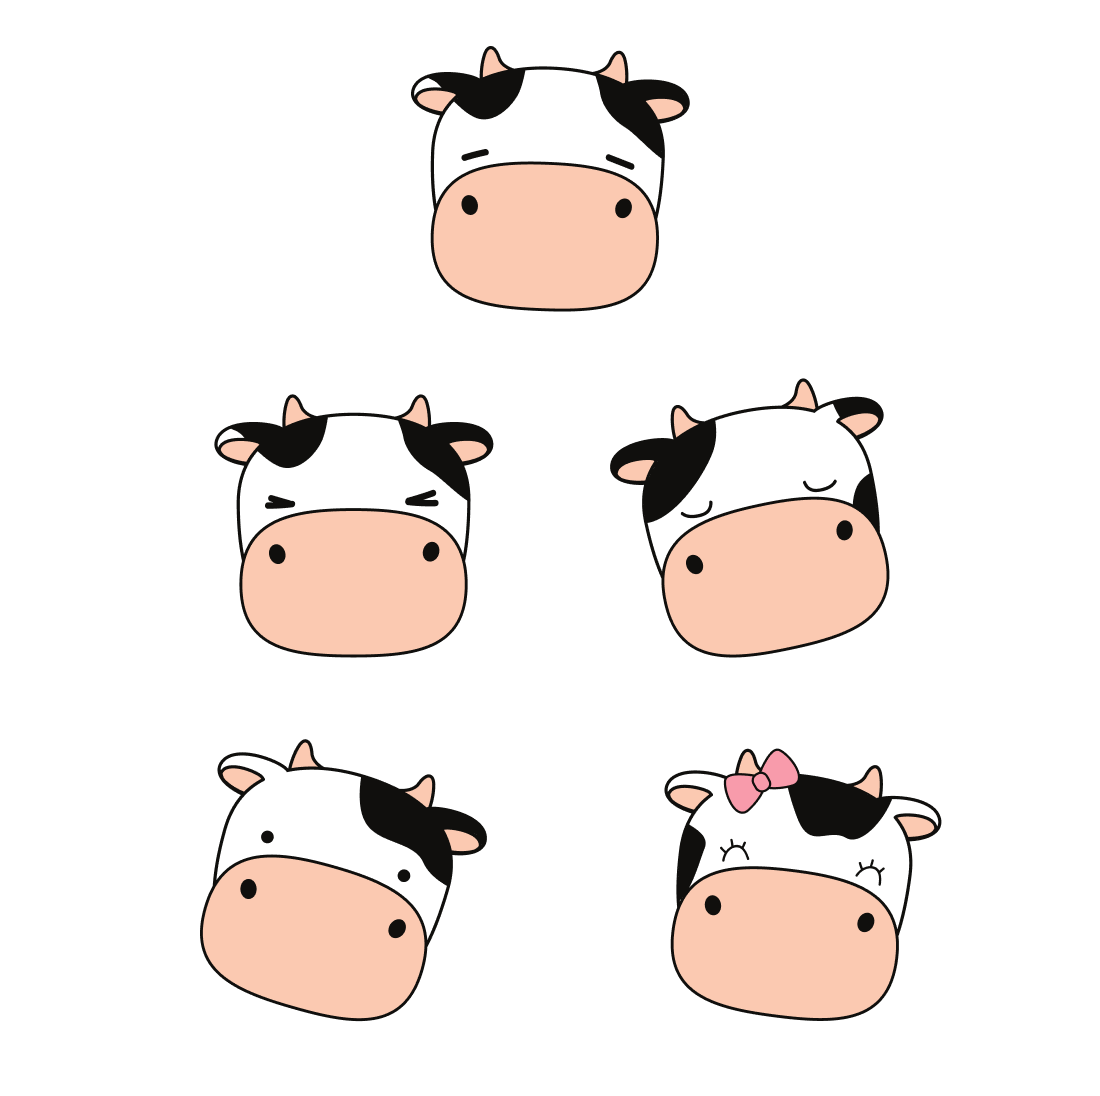 Cow's head with four different faces.